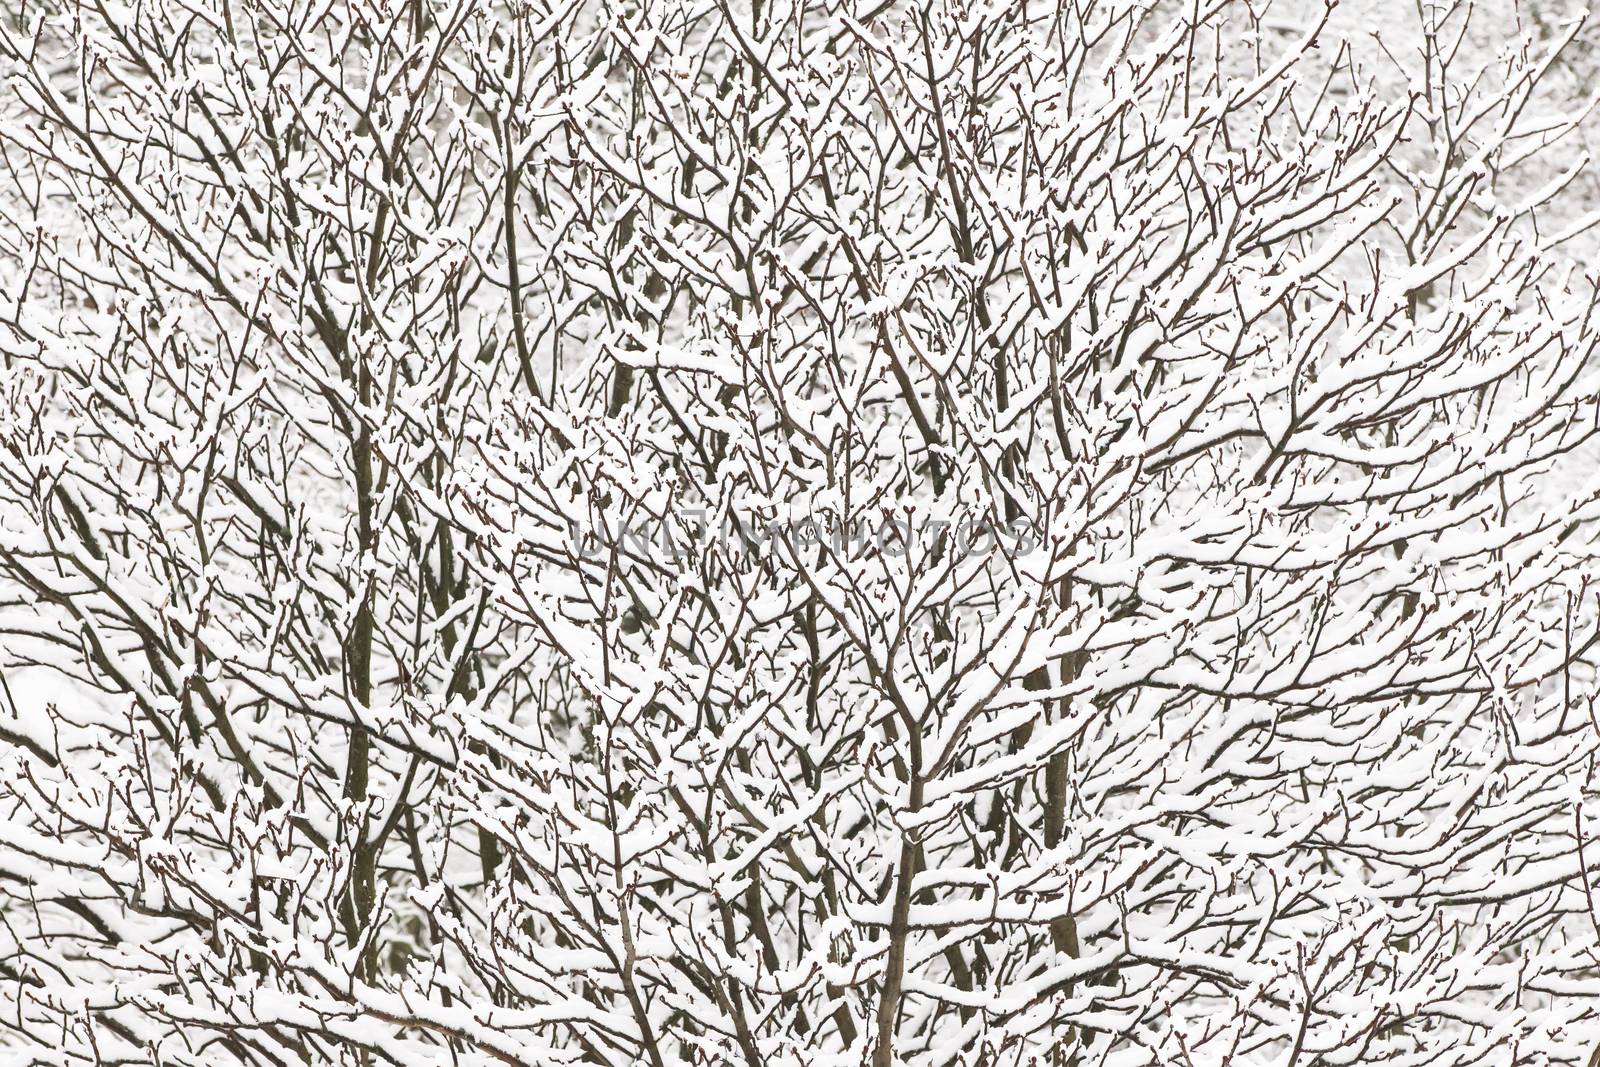 Texture of branches covered with snow. Winter pattern of snow-covered branches